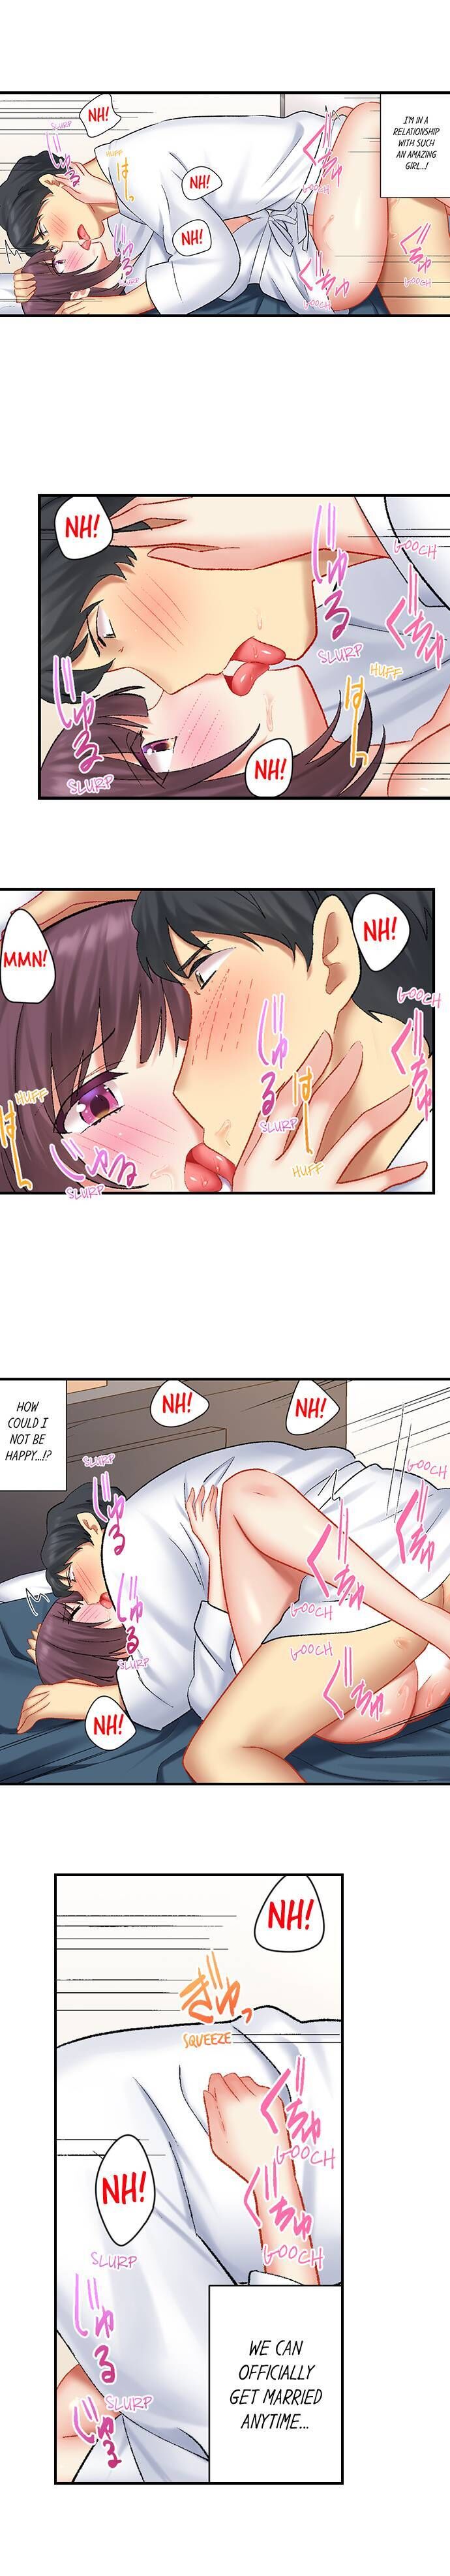 Our Kinky Newlywed Life - Chapter 30 Page 4